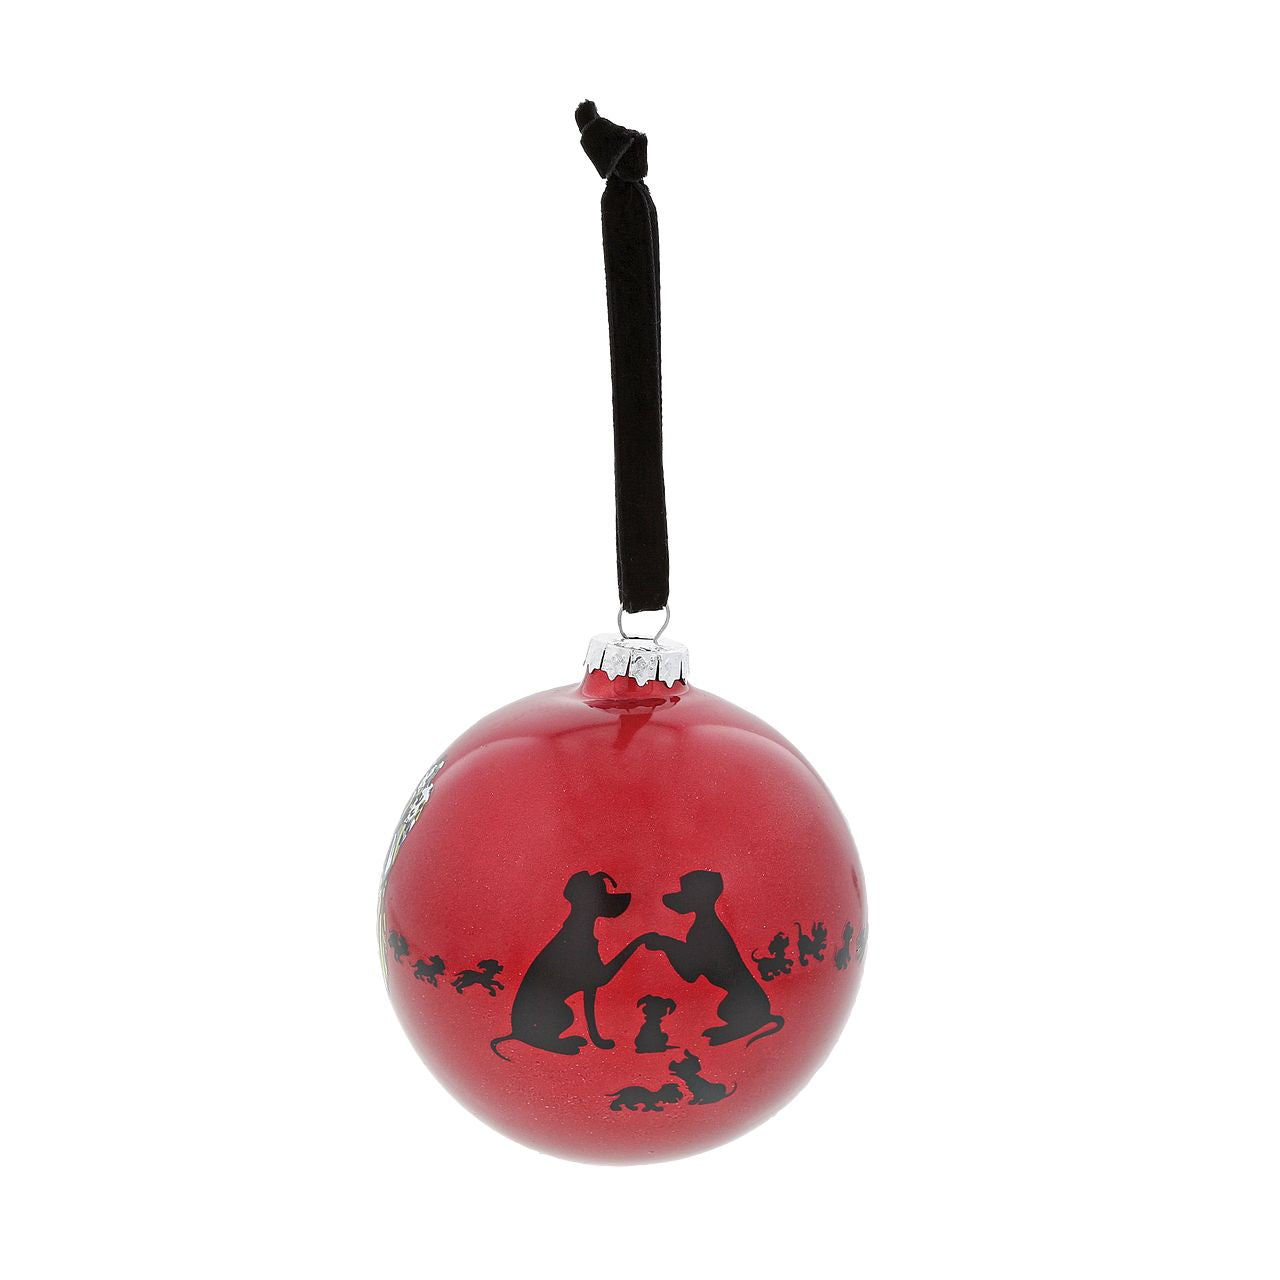 Disney Cruella De Vil Christmas Bauble One Classy Devil  The vibrant colours and villainous artwork create this wickedly eye-catching Cruella De Vil glass Bauble. This fabulous 101 Dalmatian keepsake would make a lovely unique gift for a friend, or a self-purchase to brighten up the home. Presented in a branded window box.